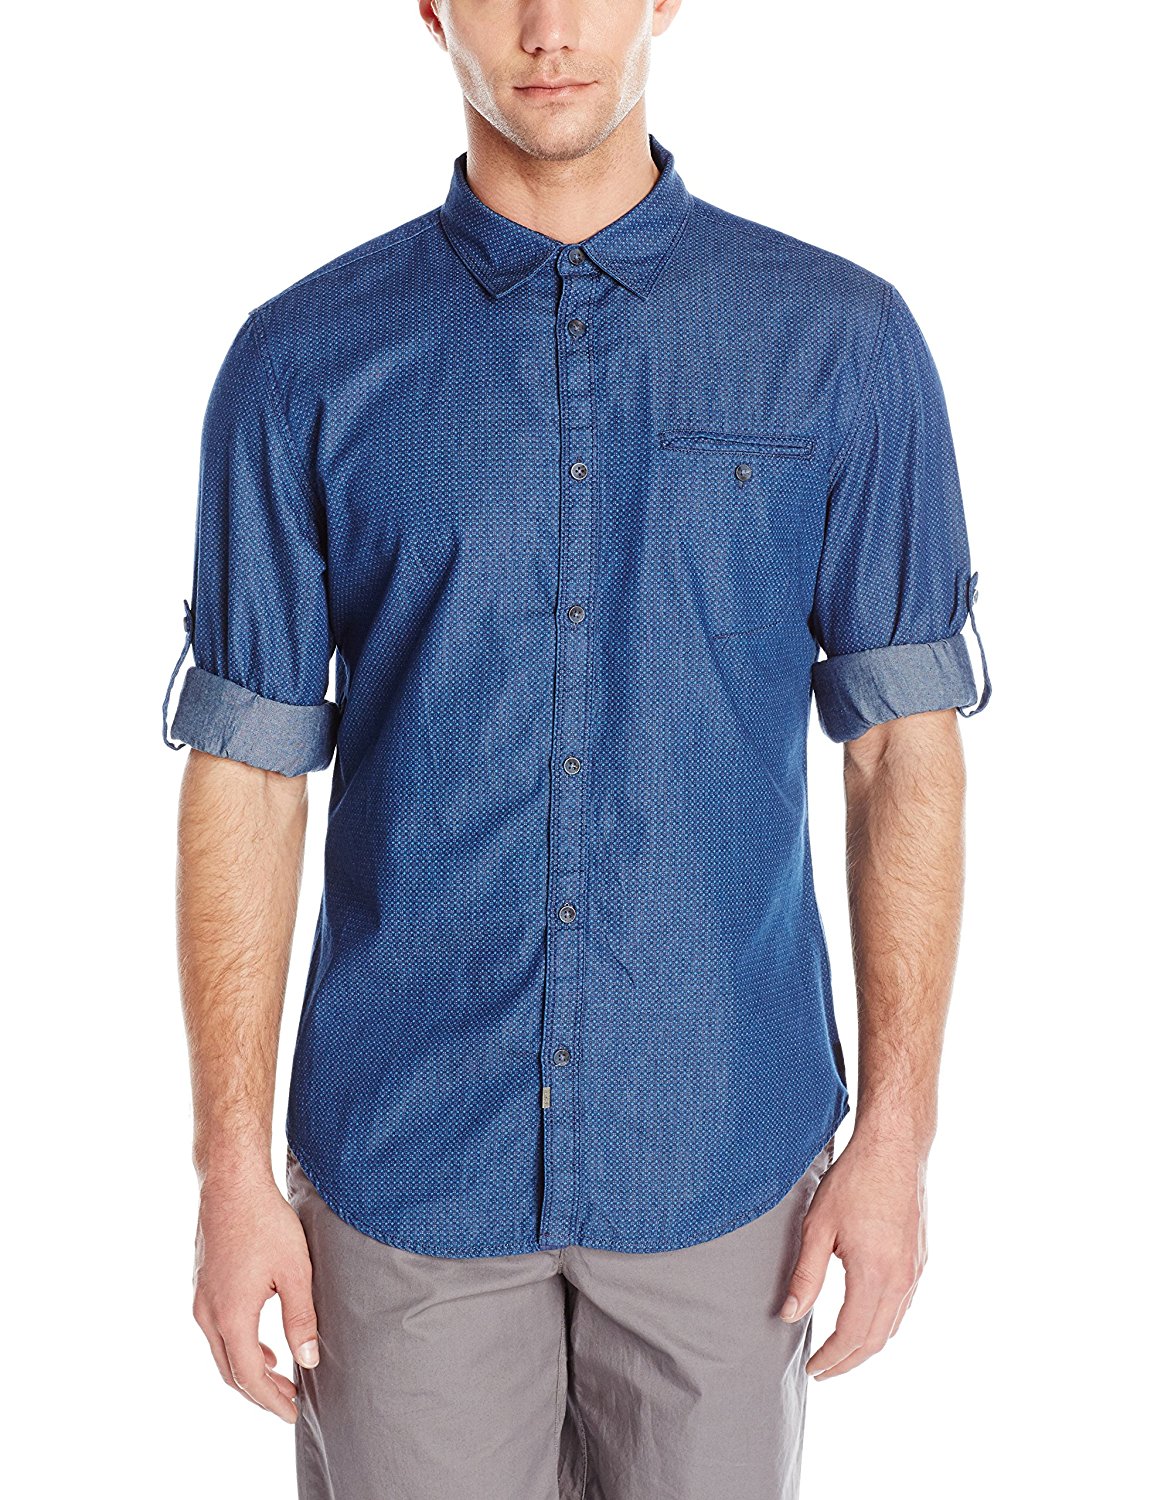 9. The Chambray Shirt summer outfits